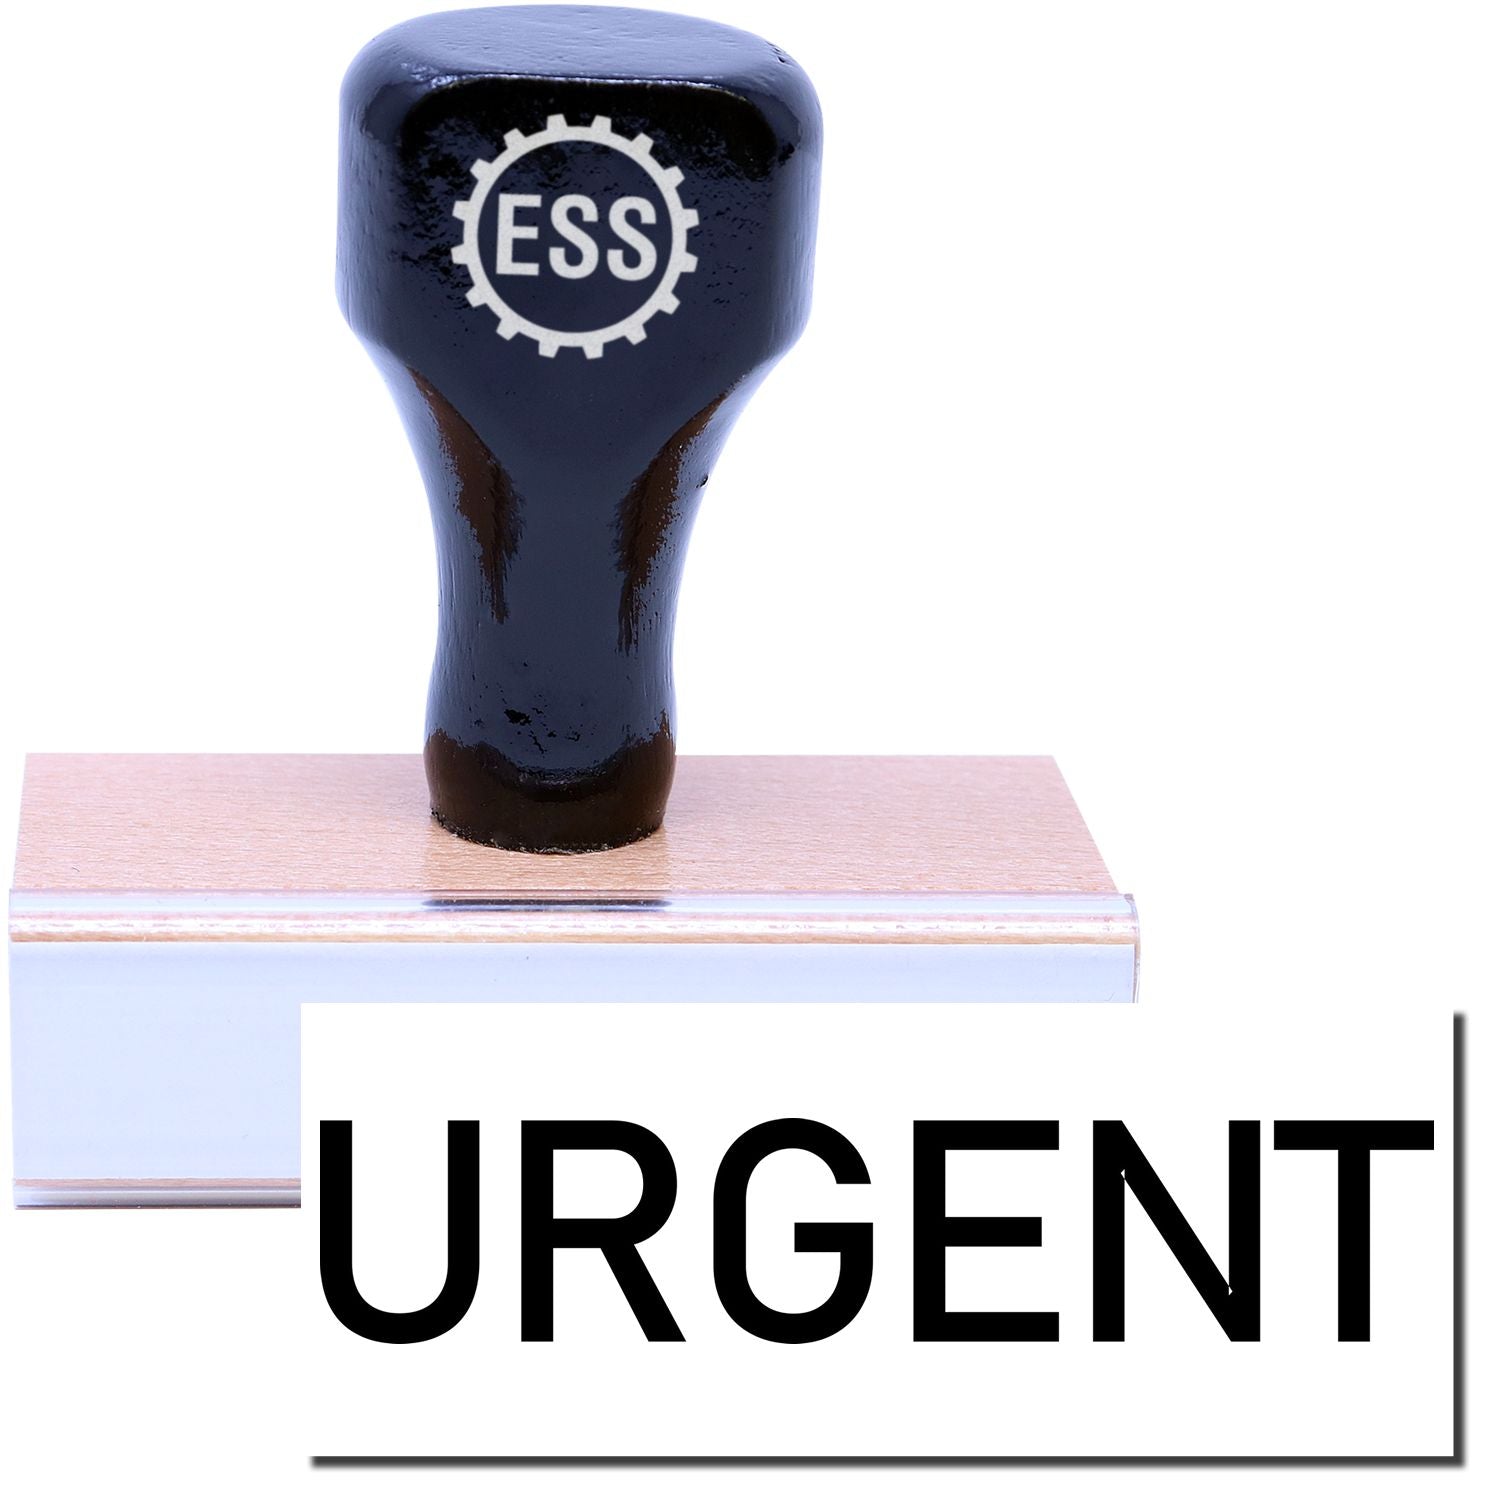 A stock office rubber stamp with a stamped image showing how the text "URGENT" in a narrow font is displayed after stamping.